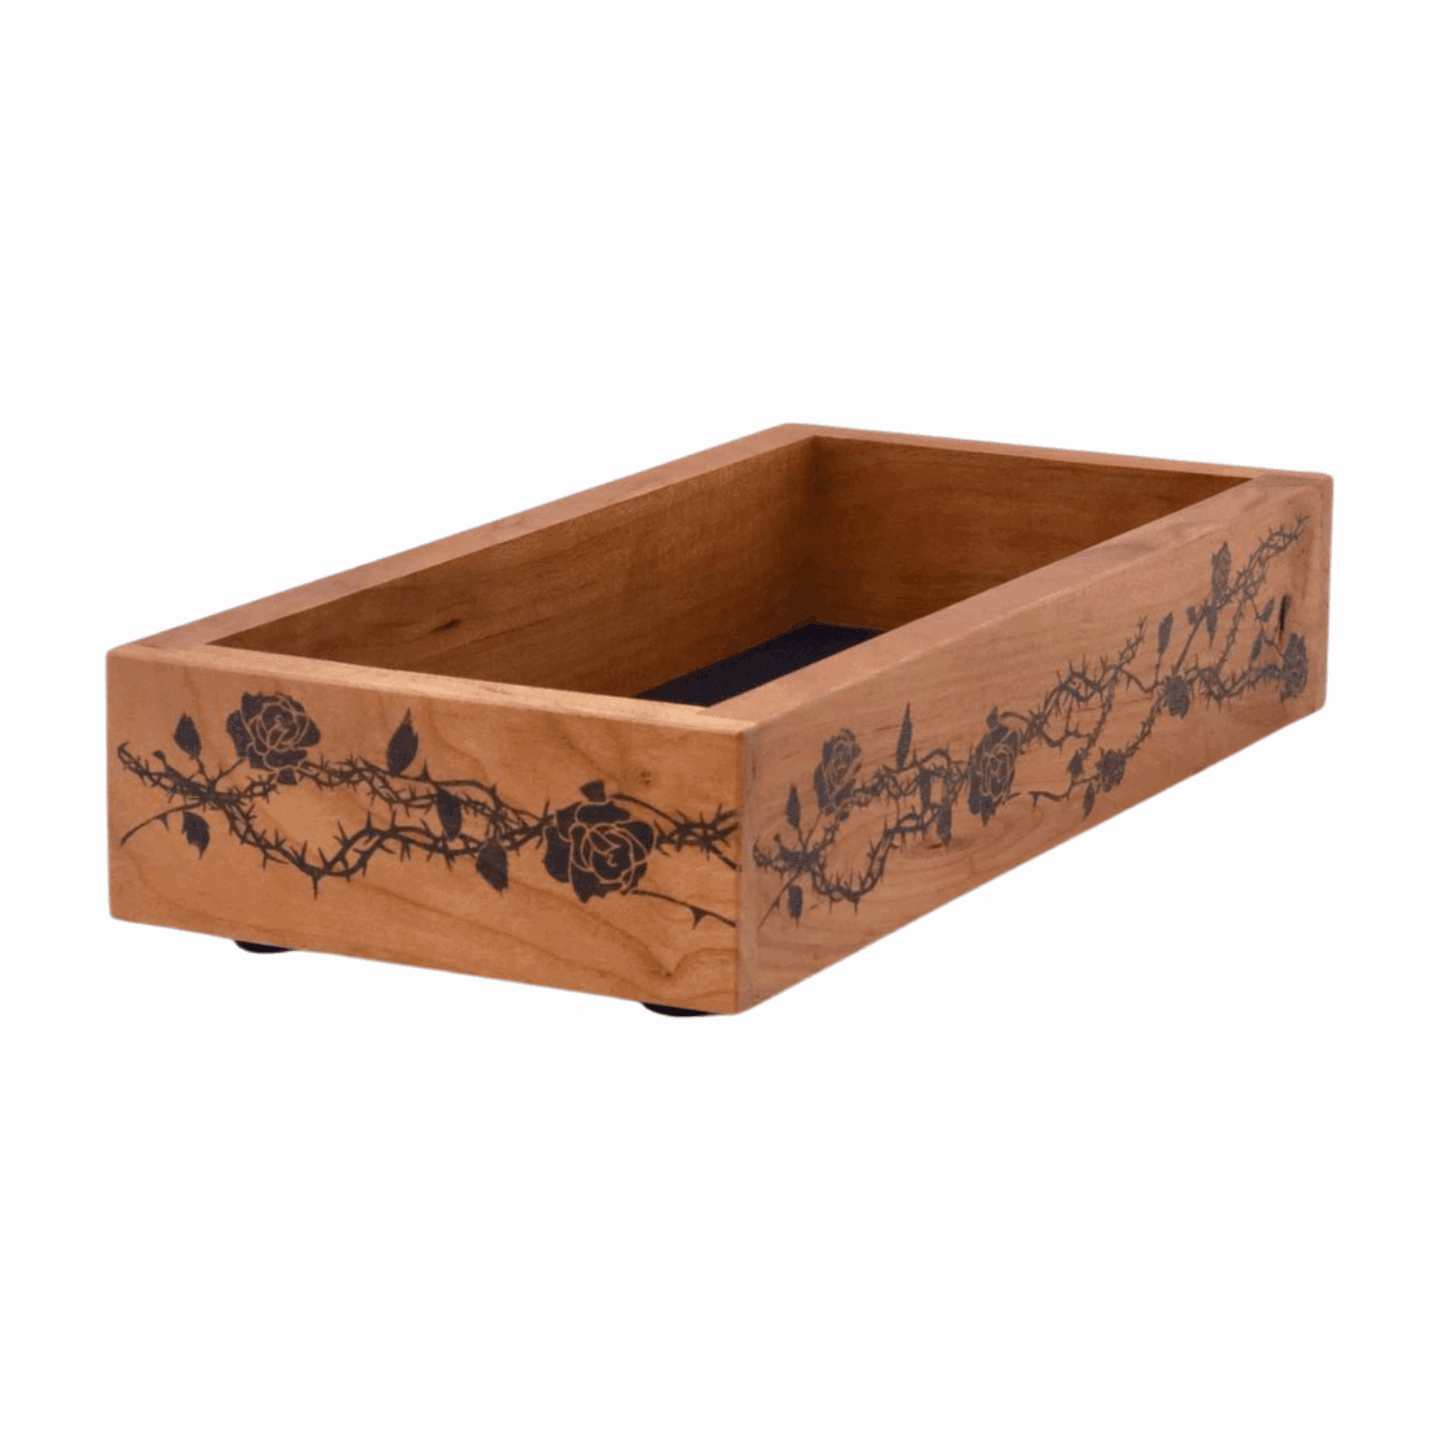 Dark Cottagecore Rose & Thorn Portable Dice Tray Wood for TTRPG, Pathfinder, Bunco, DnD Dice Rolling Tray, Gothic Rose Trinket Tray DM Gift  - Dragon Armor Games